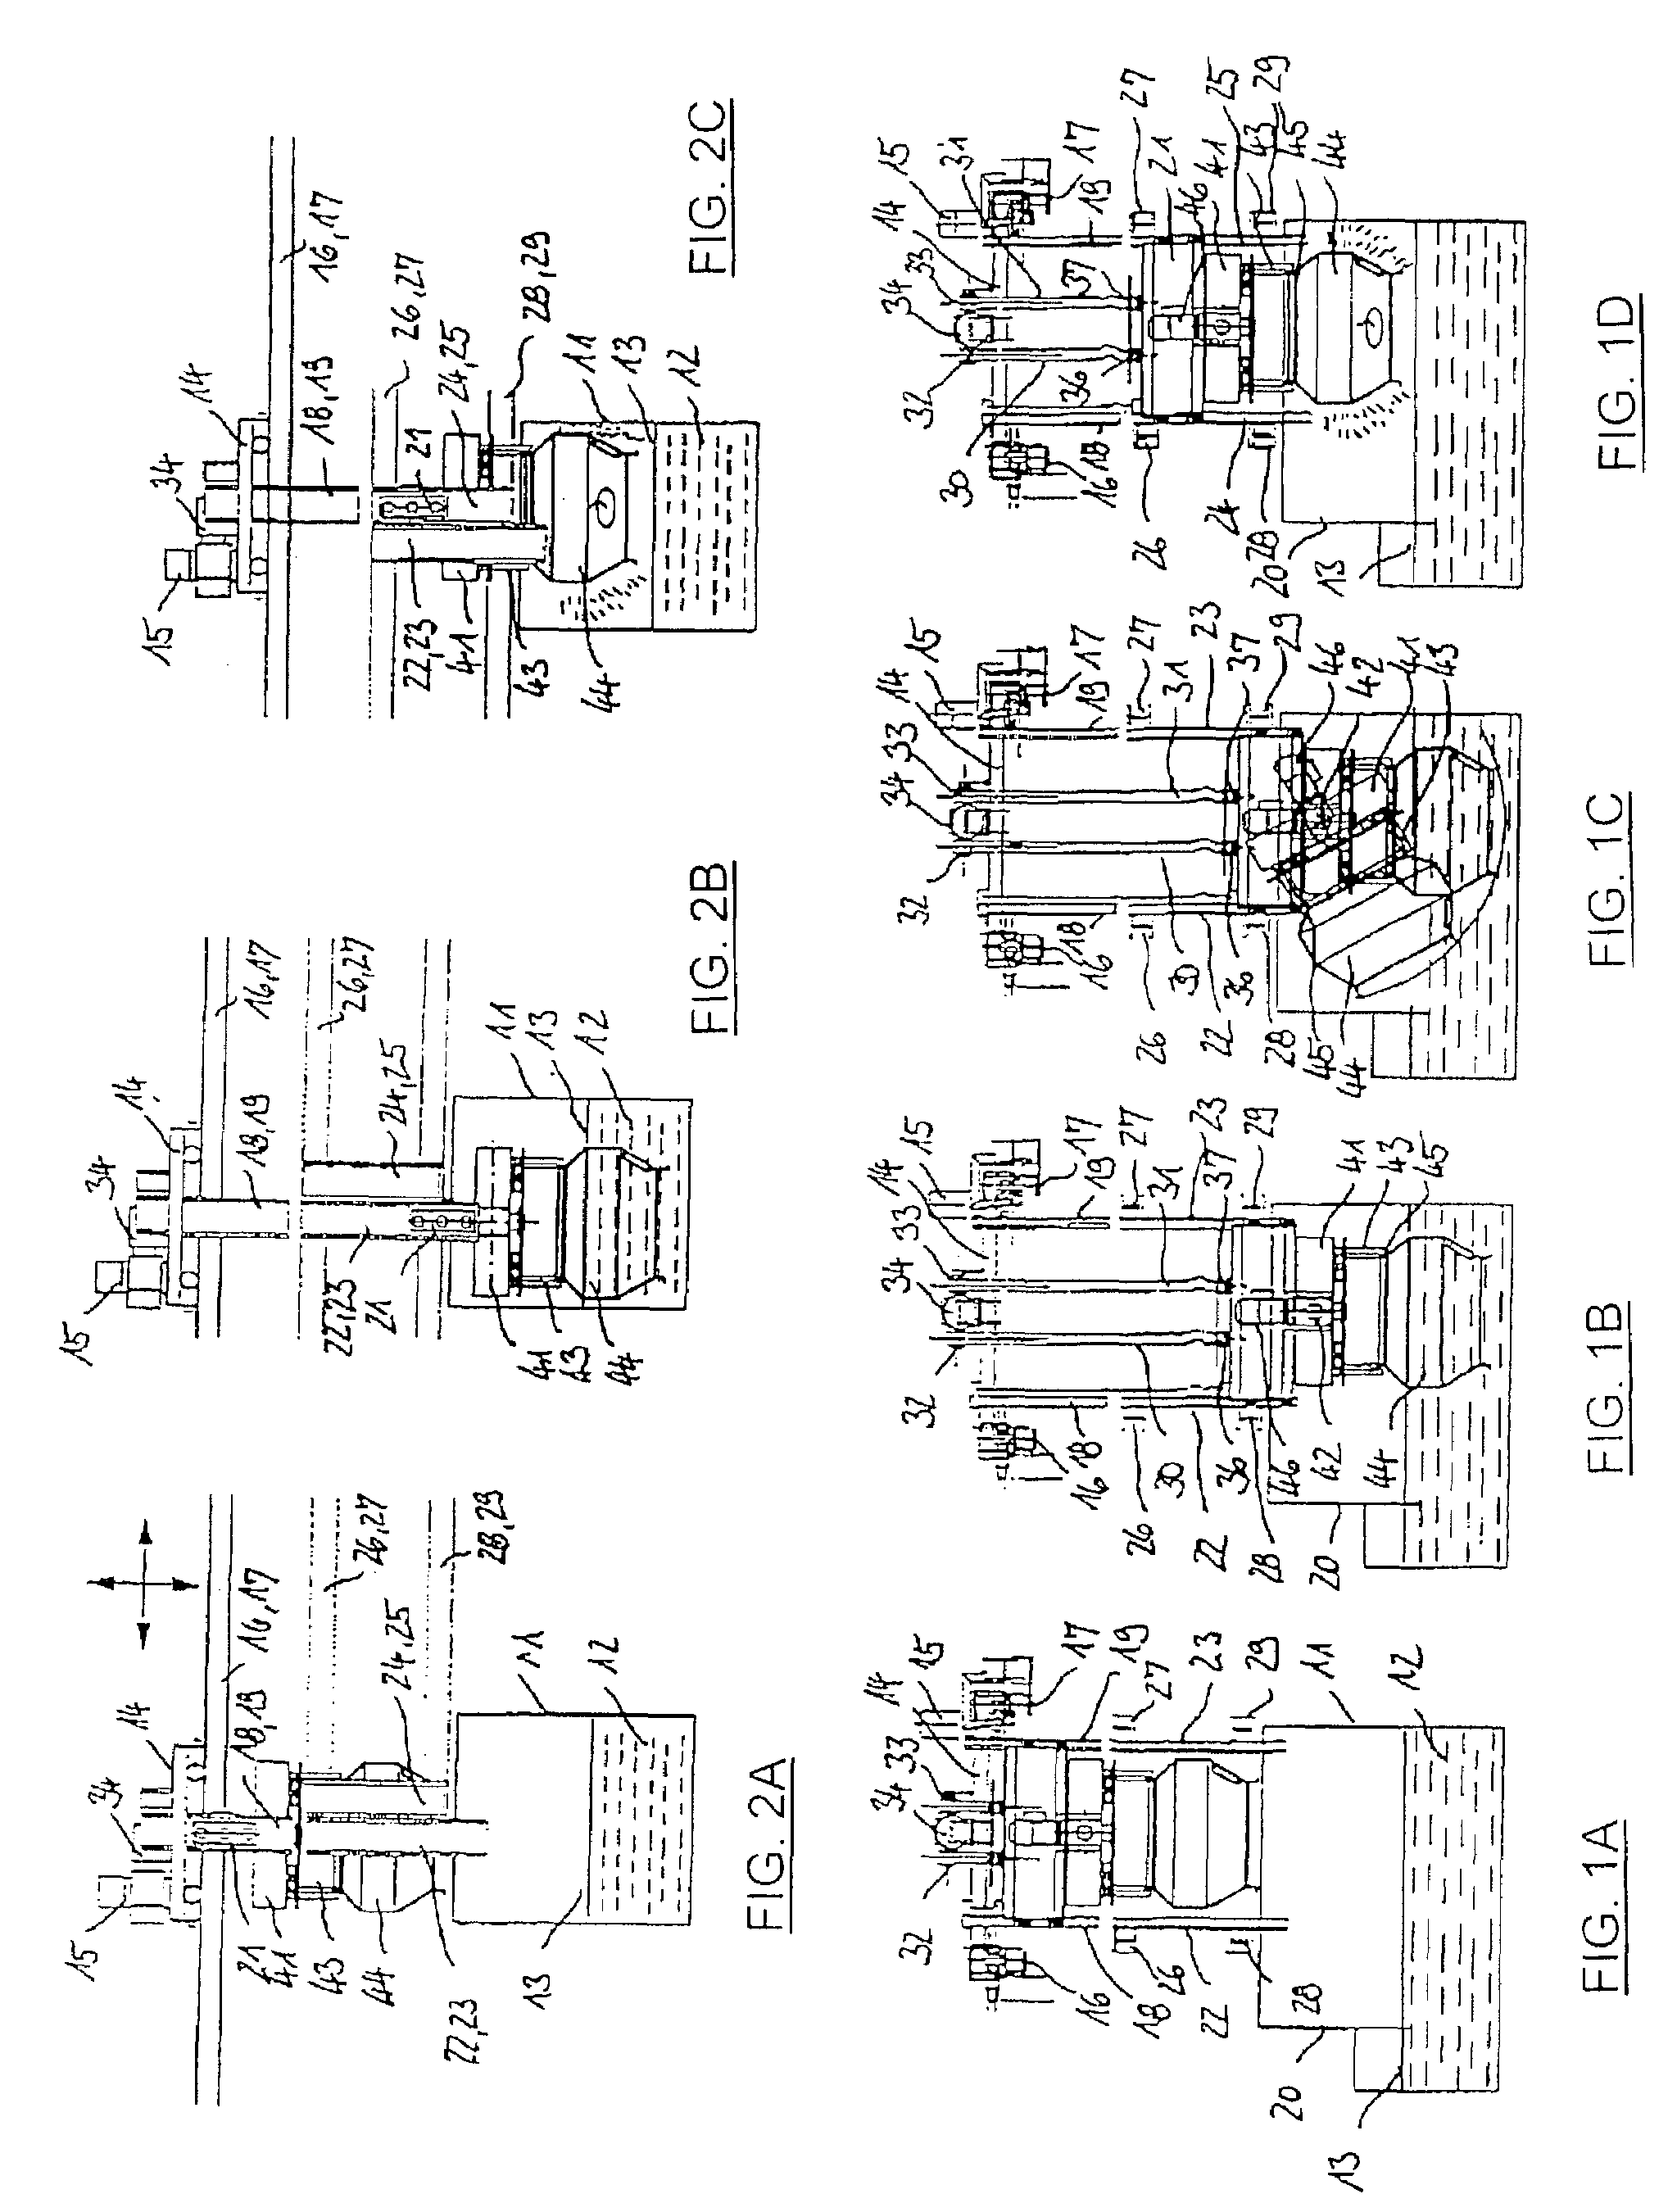 System for treating mass-production parts